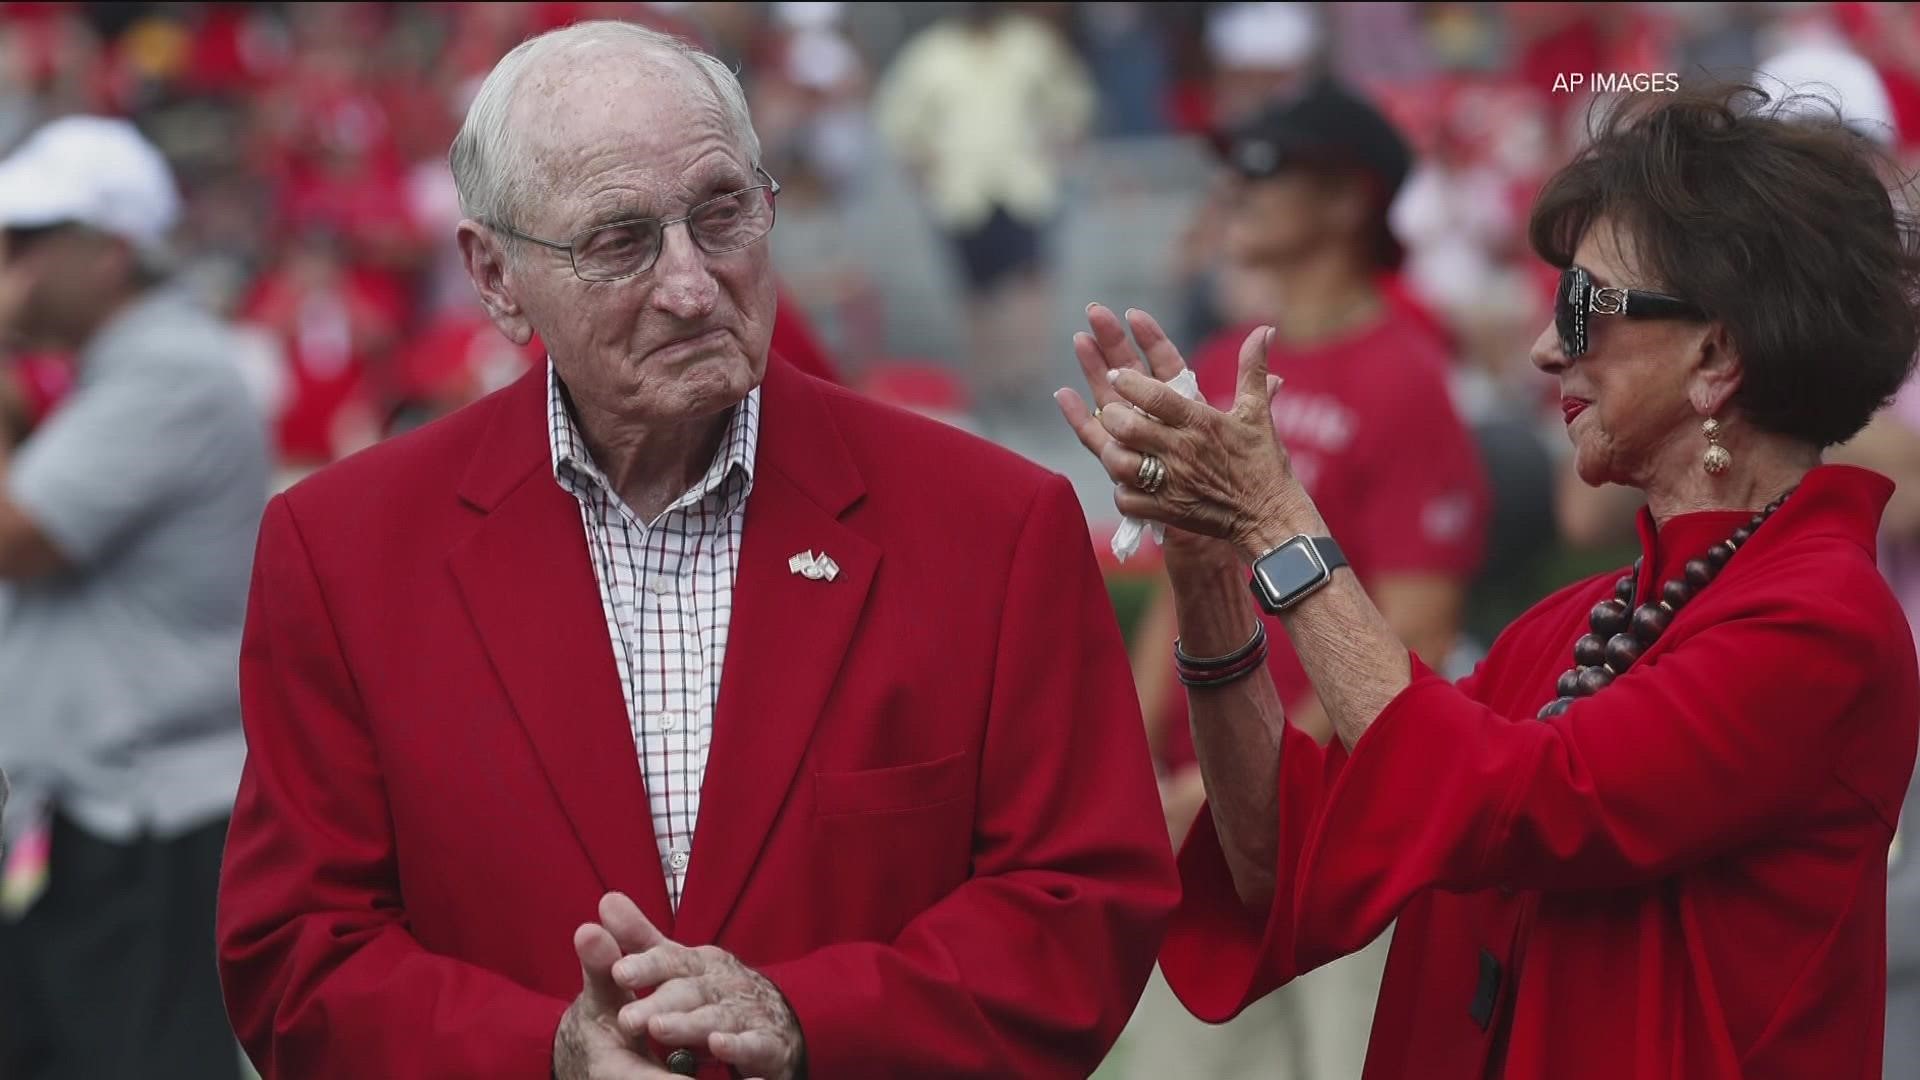 UGA is holding a public celebration of life for Vince Dooley at 7:30 p.m.